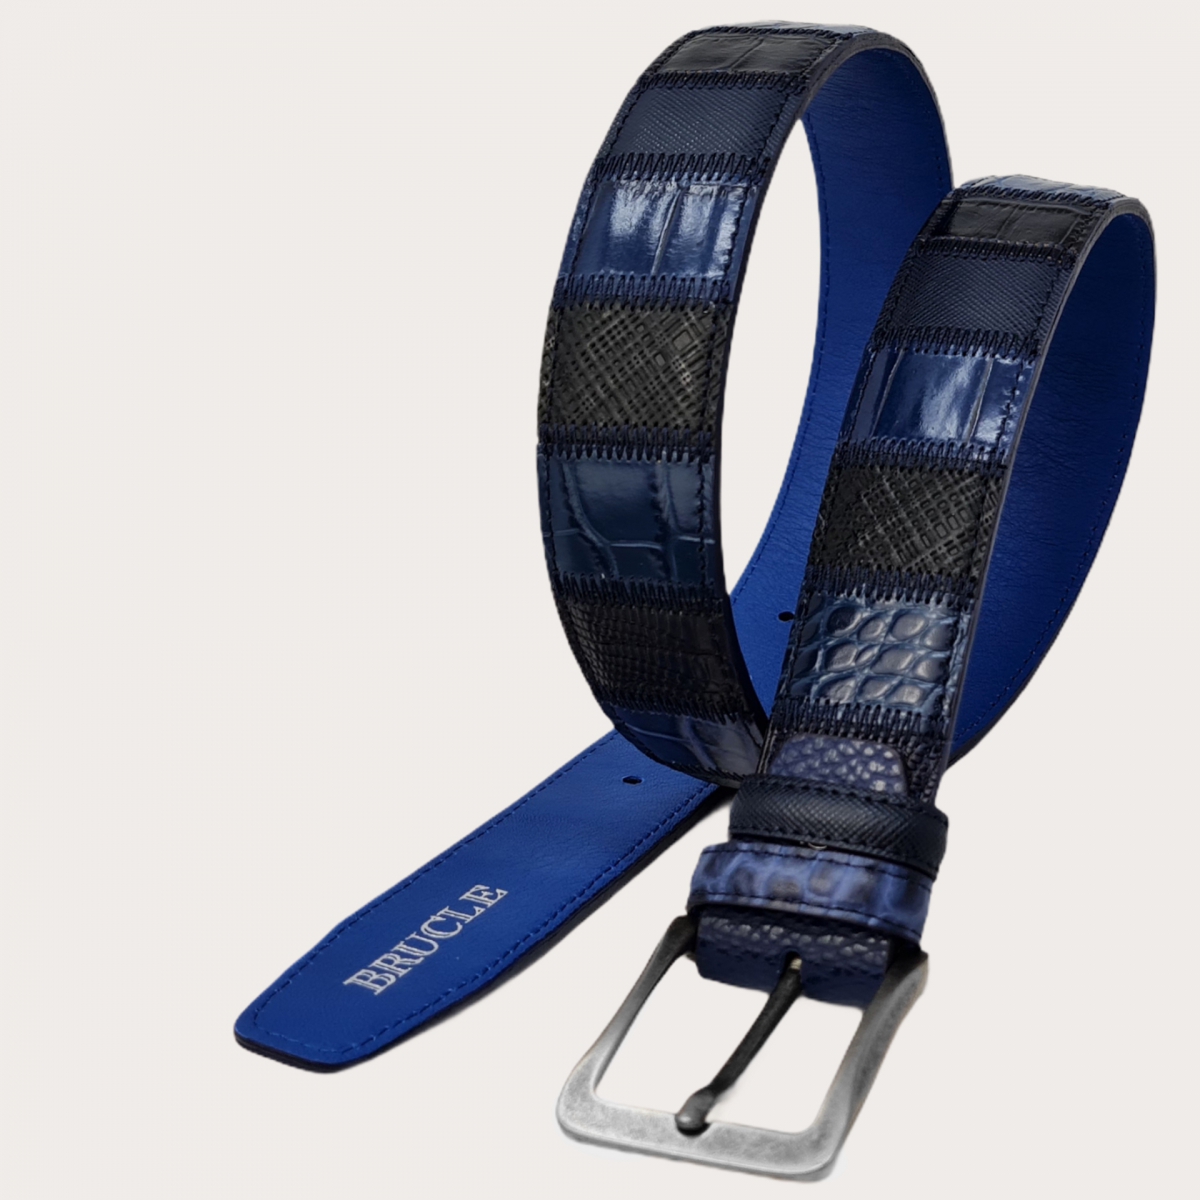 BRUCLE Exclusive patchwork belt in shades of blue